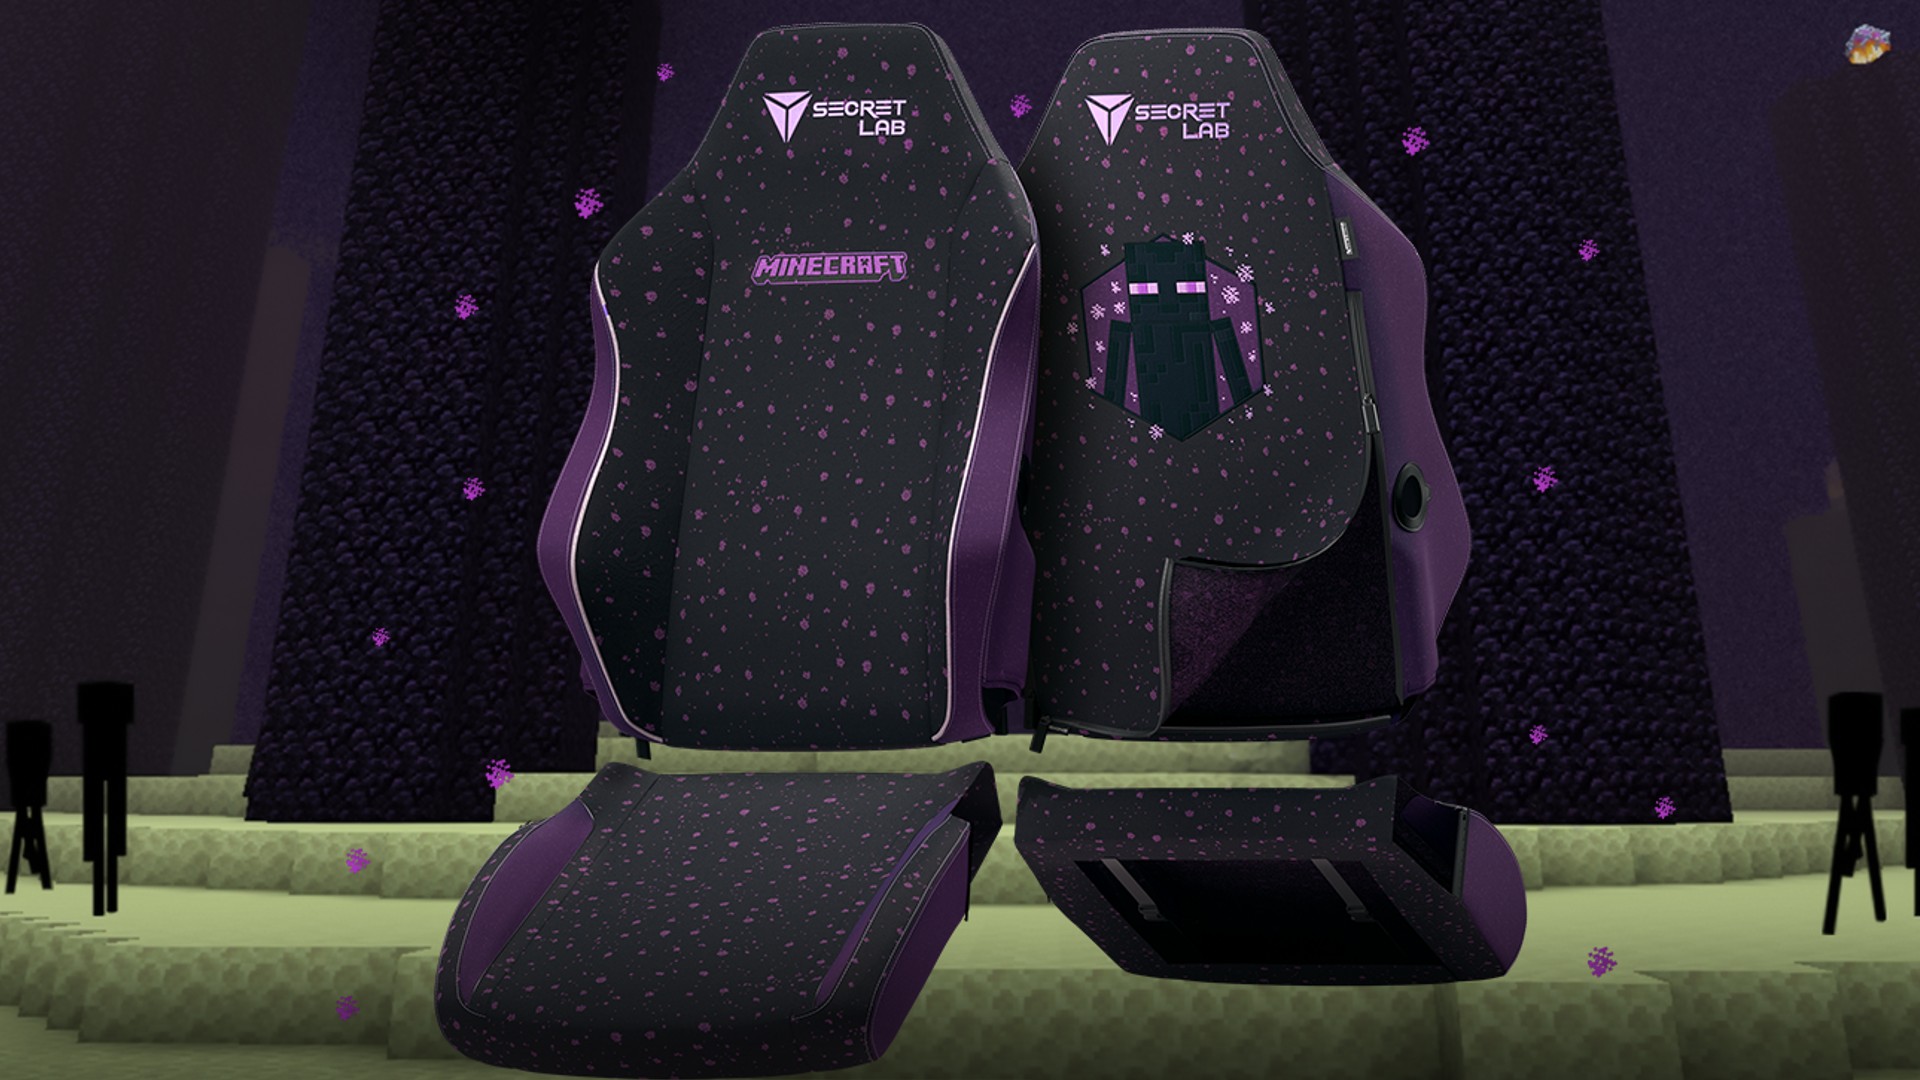 These new Secretlab Skins are a must-have for Minecraft fans